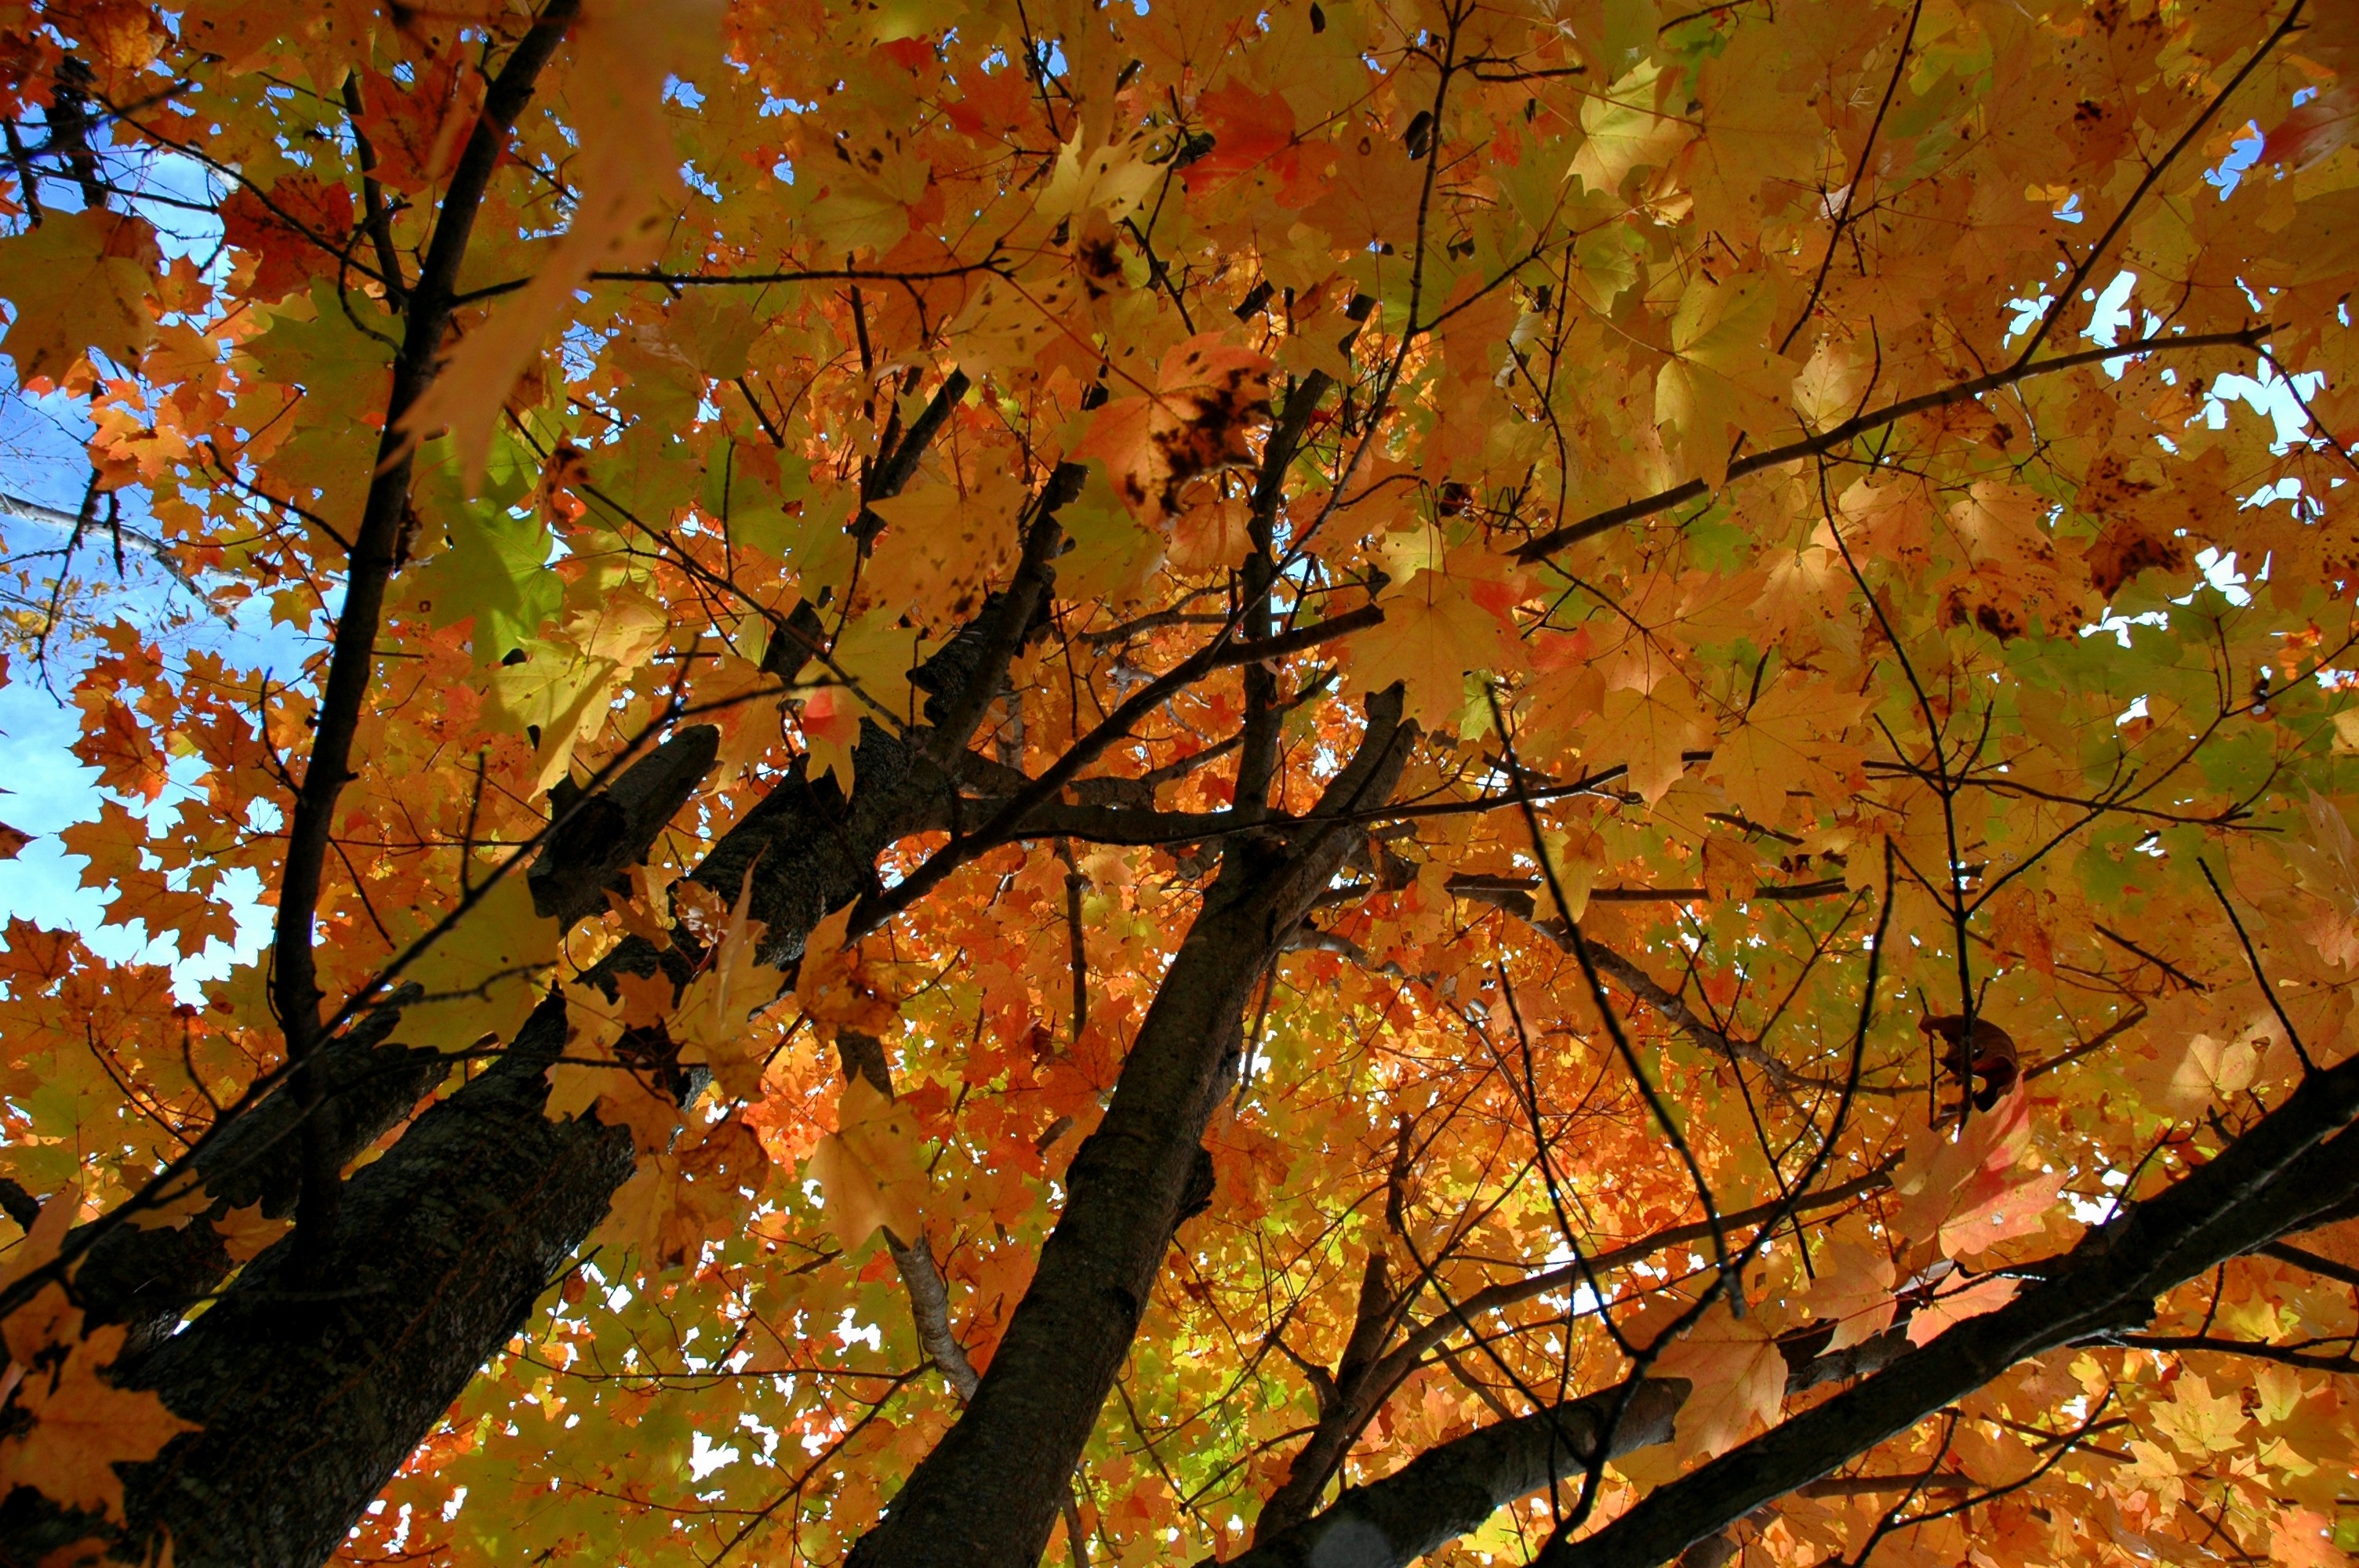 General 3008x2000 nature forest trees fall leaves